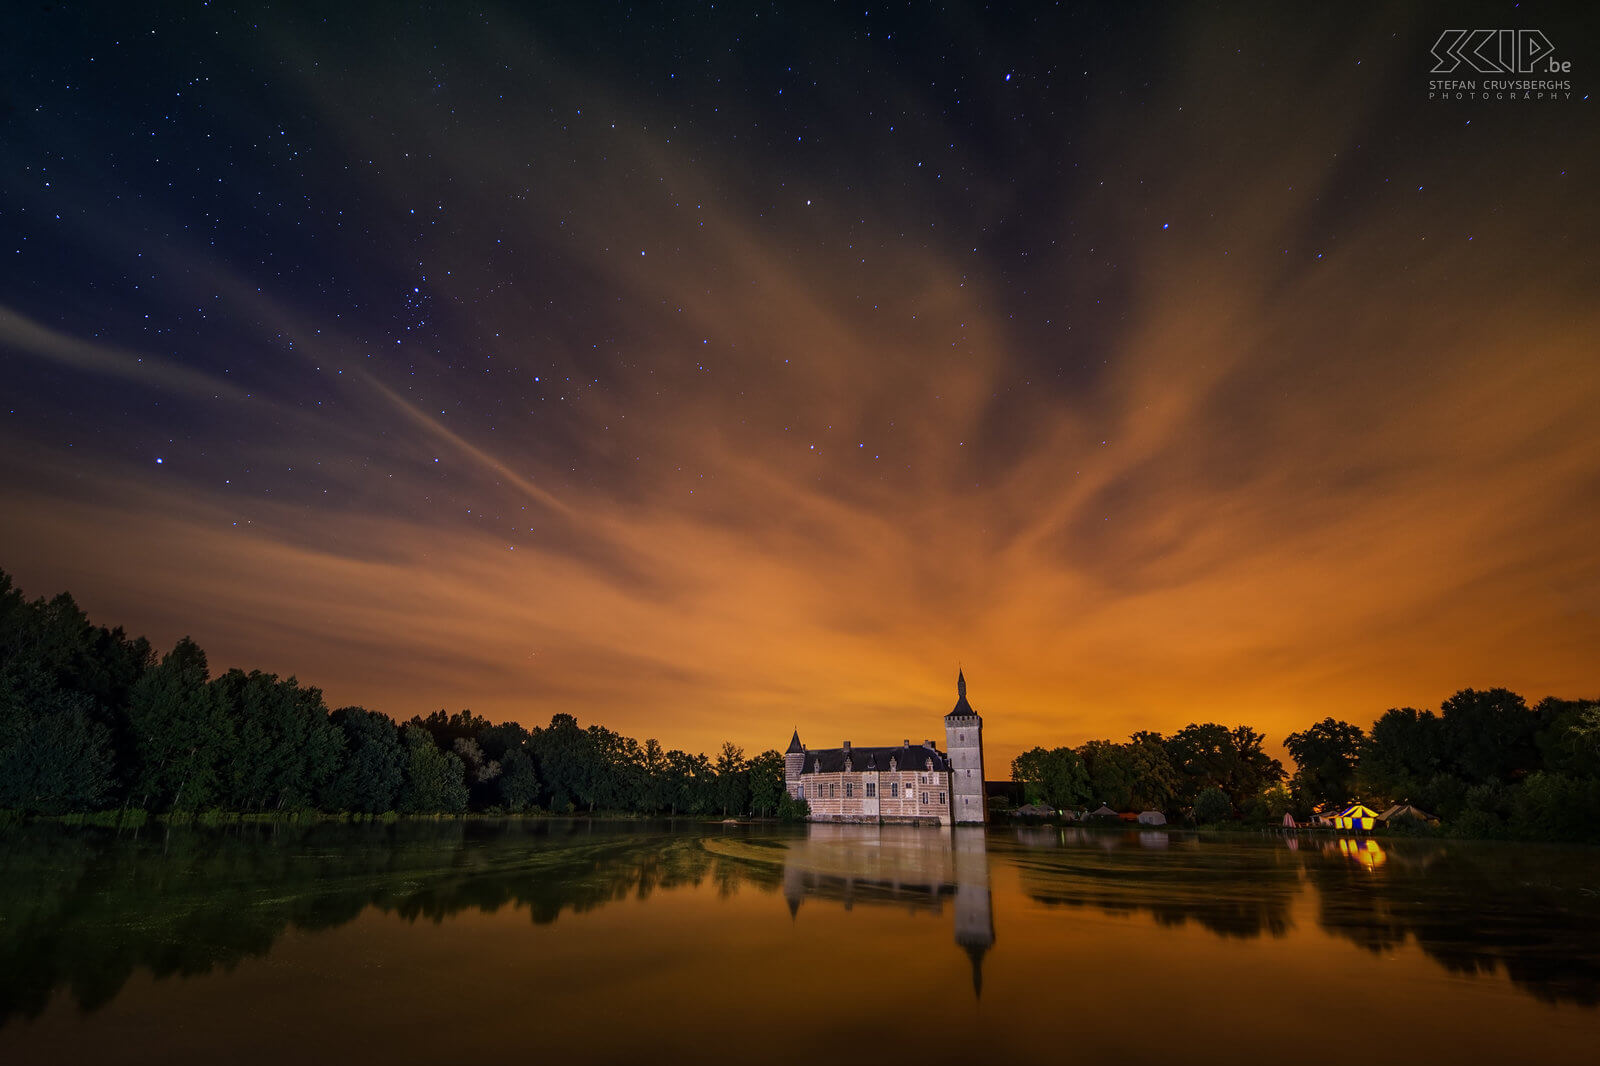 Hageland by night - Castle of Horst The castle of Horst (Sint-Pieters-Rode, Holsbeek) with a beautiful starry sky and orange clouds of the light pollution in August. The castle of Horst was built in the mid-14th century and is still quite authentic.  Stefan Cruysberghs